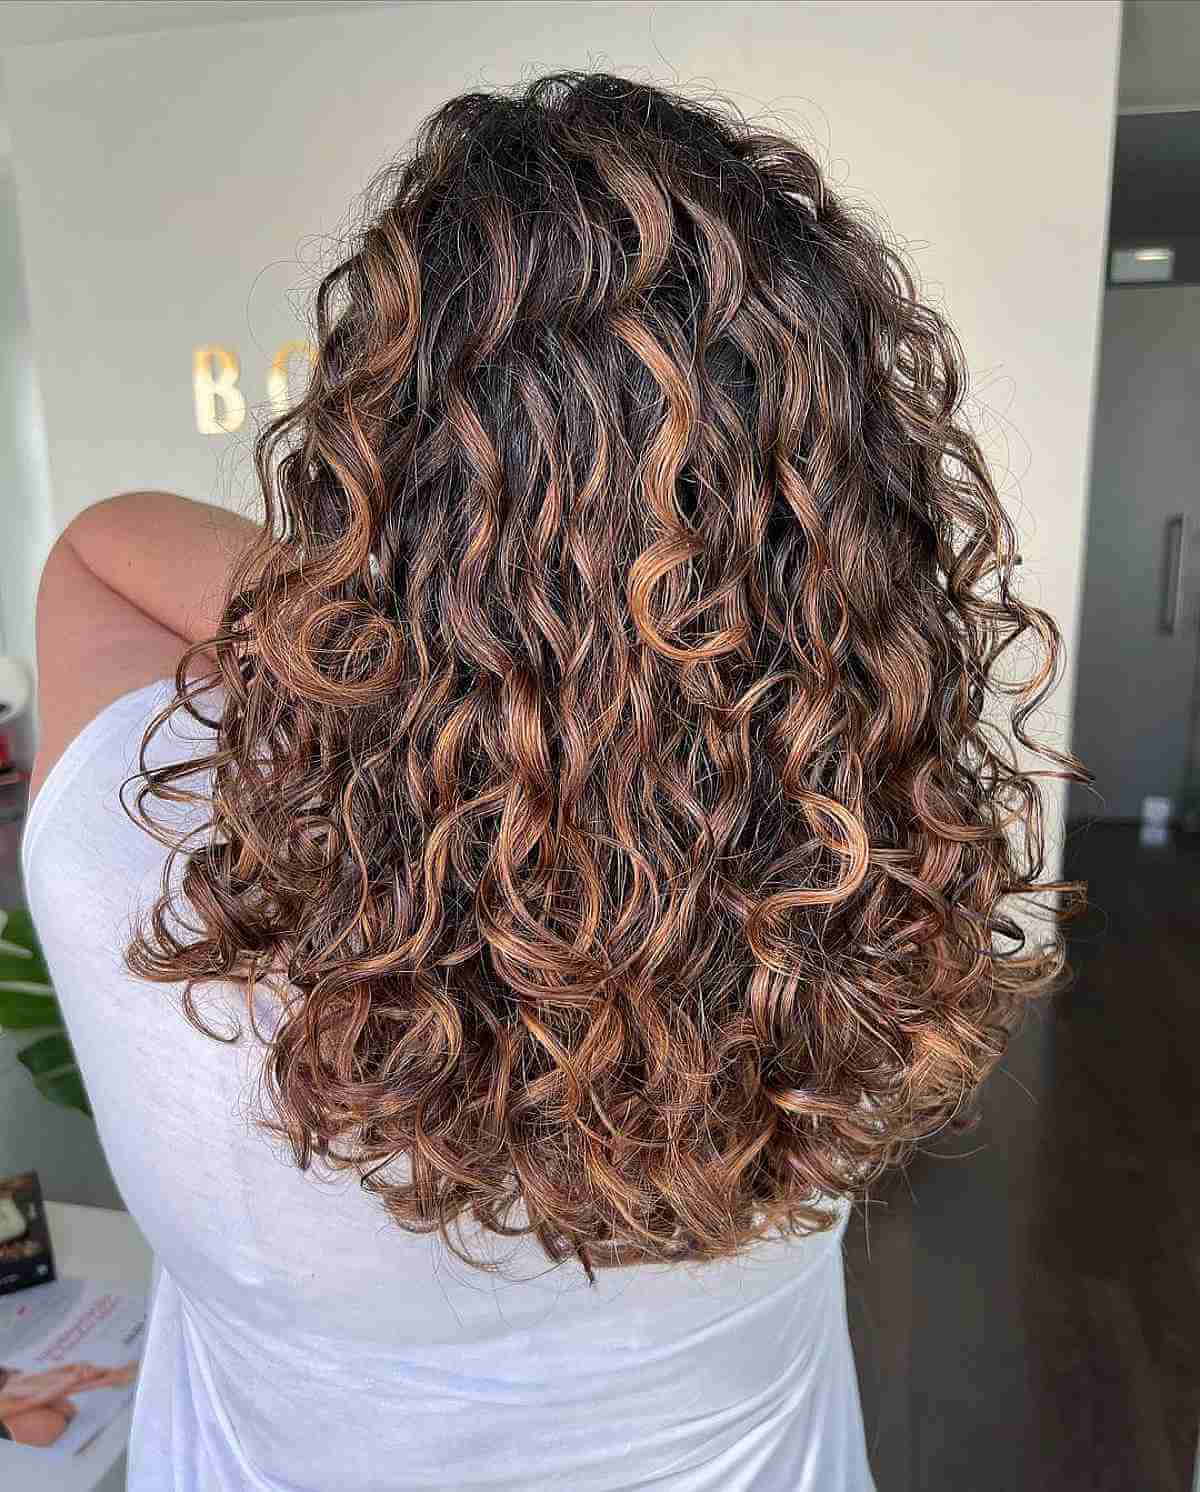 Chestnut Brown Balayage on Voluminous Curly Hair